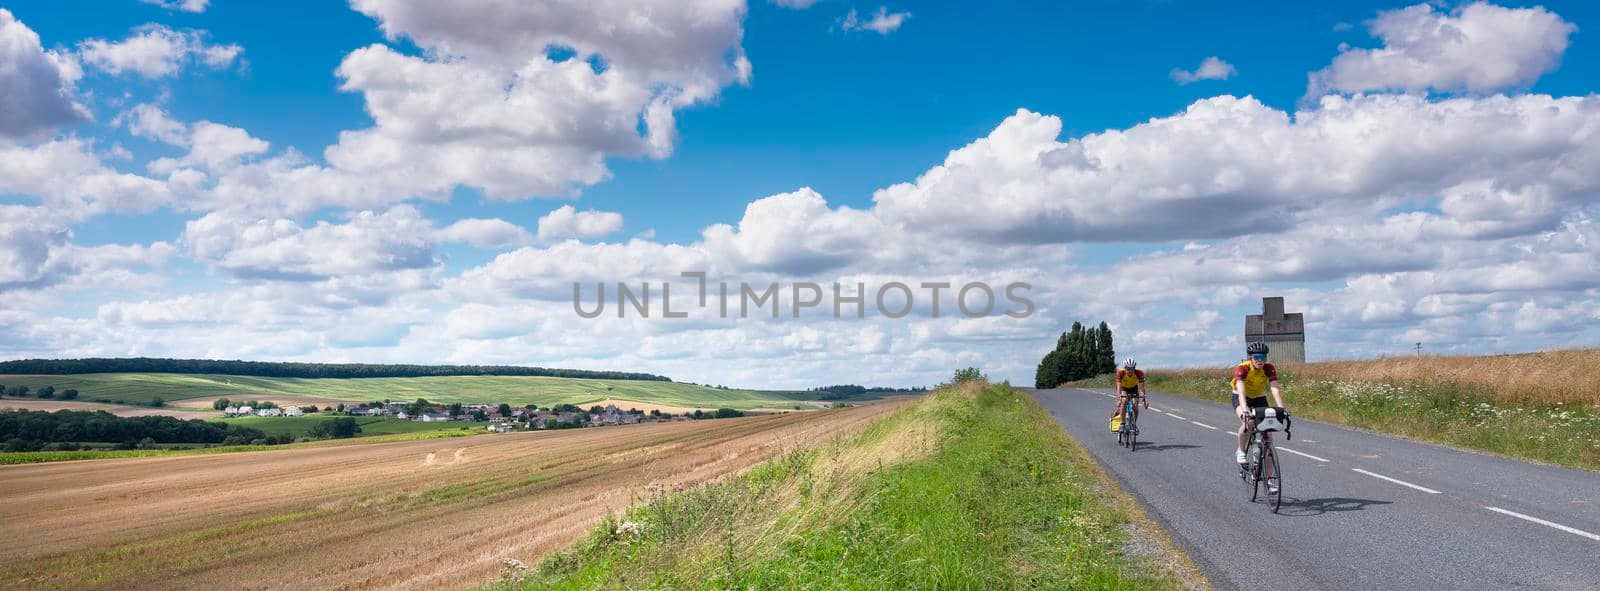 people on sport bicycle in french countryside south of reims in france by ahavelaar